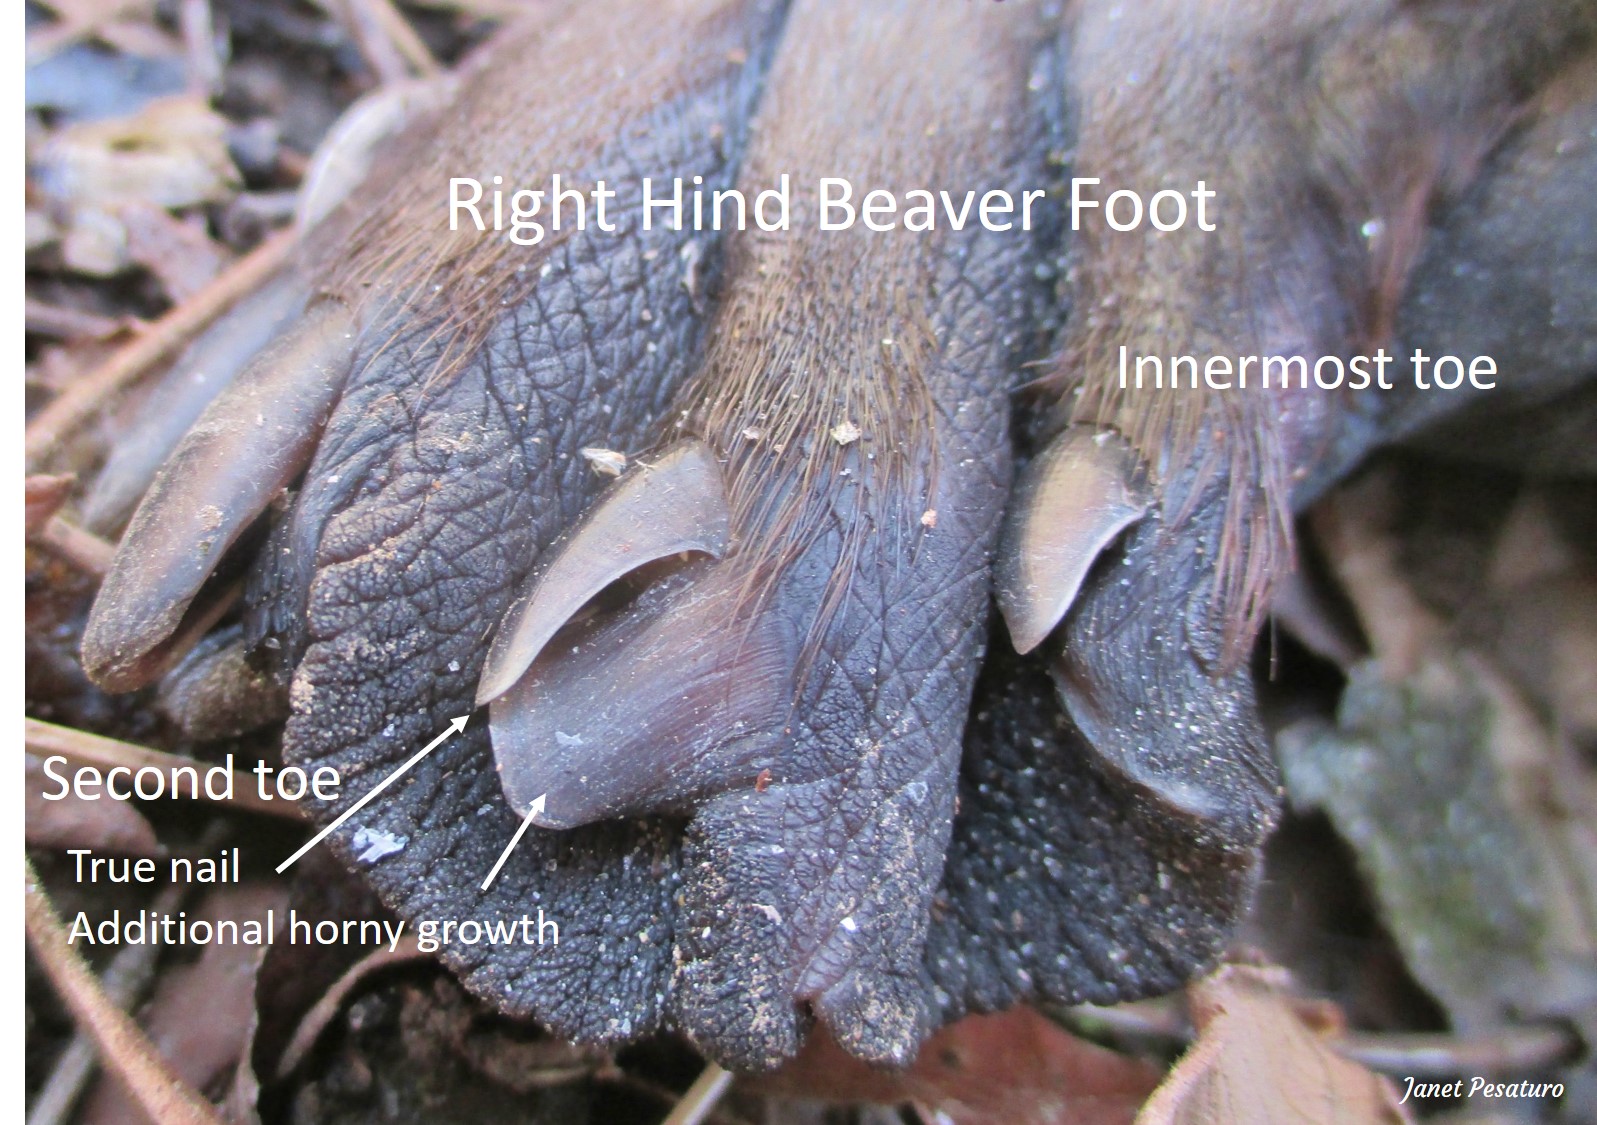 beaver right hind foot showing the two innermost toes used for grooming.